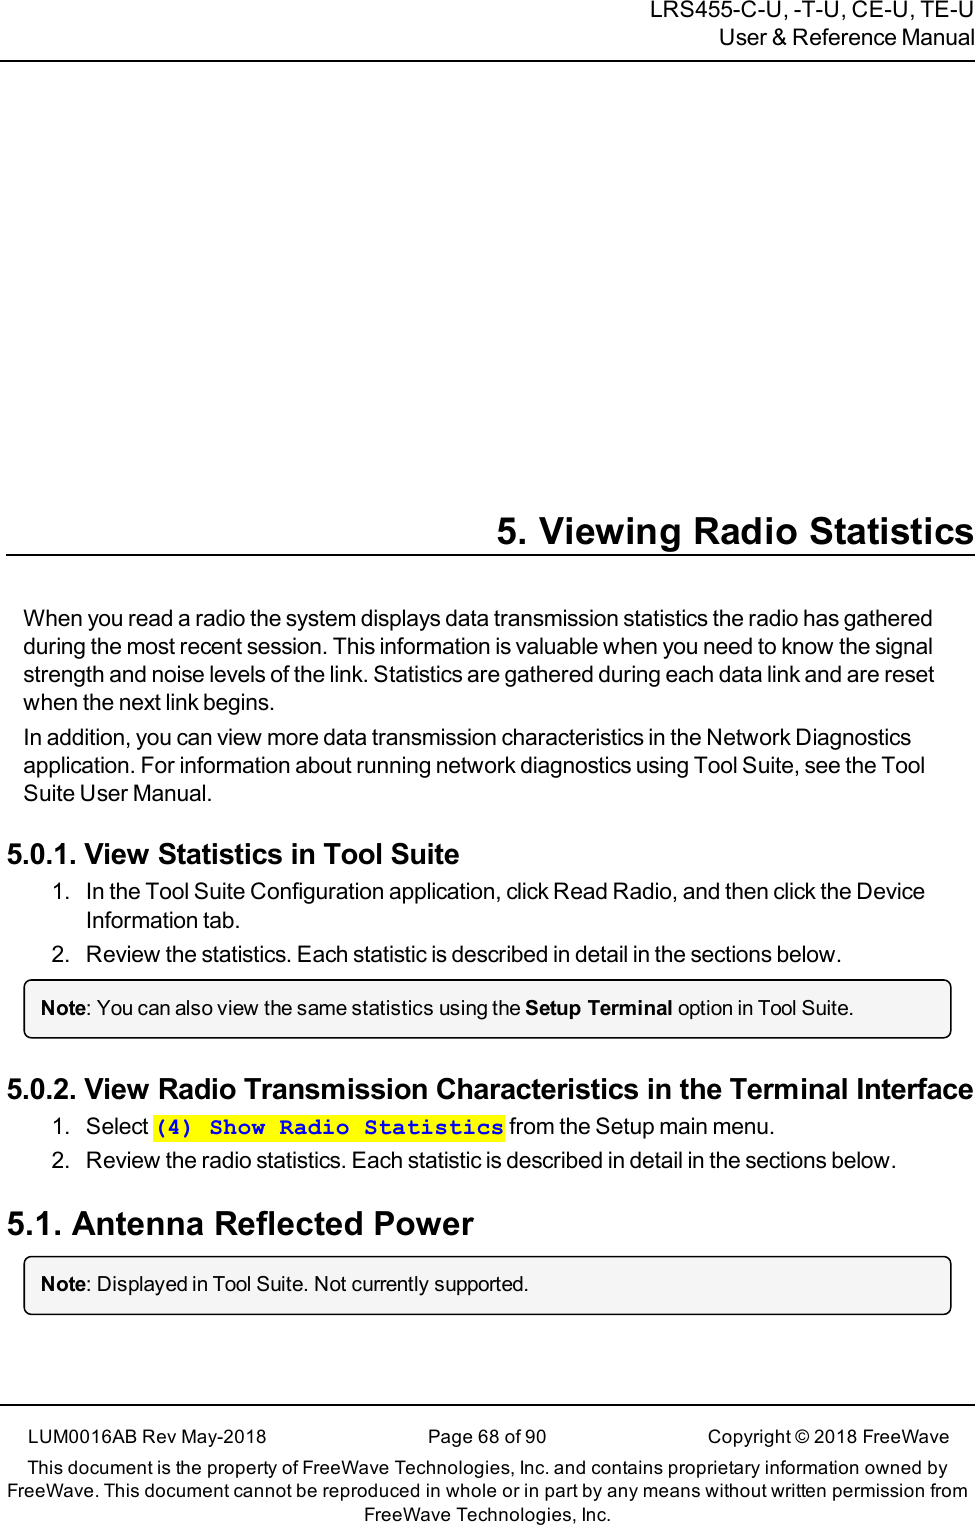 LRS455-C-U, -T-U, CE-U, TE-UUser &amp; Reference Manual5. Viewing Radio StatisticsWhen you read a radio the system displays data transmission statistics the radio has gatheredduring the most recent session. This information is valuable when you need to know the signalstrength and noise levels of the link. Statistics are gathered during each data link and are resetwhen the next link begins.In addition, you can view more data transmission characteristics in the Network Diagnosticsapplication. For information about running network diagnostics using Tool Suite, see the ToolSuite User Manual.5.0.1. View Statistics in Tool Suite1. In the Tool Suite Configuration application, clickRead Radio, and then click the DeviceInformation tab.2. Review the statistics. Each statistic is described in detail in the sections below.Note: You can also view the same statistics using the Setup Terminal option in Tool Suite.5.0.2. View Radio Transmission Characteristics in the Terminal Interface1. Select (4) Show Radio Statistics from the Setup main menu.2. Review the radio statistics. Each statistic is described in detail in the sections below.5.1. Antenna Reflected PowerNote: Displayed in Tool Suite. Not currently supported.LUM0016AB Rev May-2018 Page 68 of 90 Copyright © 2018FreeWaveThis document is the property of FreeWave Technologies, Inc. and contains proprietary information owned byFreeWave. This document cannot be reproduced in whole or in part by any means without written permission fromFreeWave Technologies, Inc.